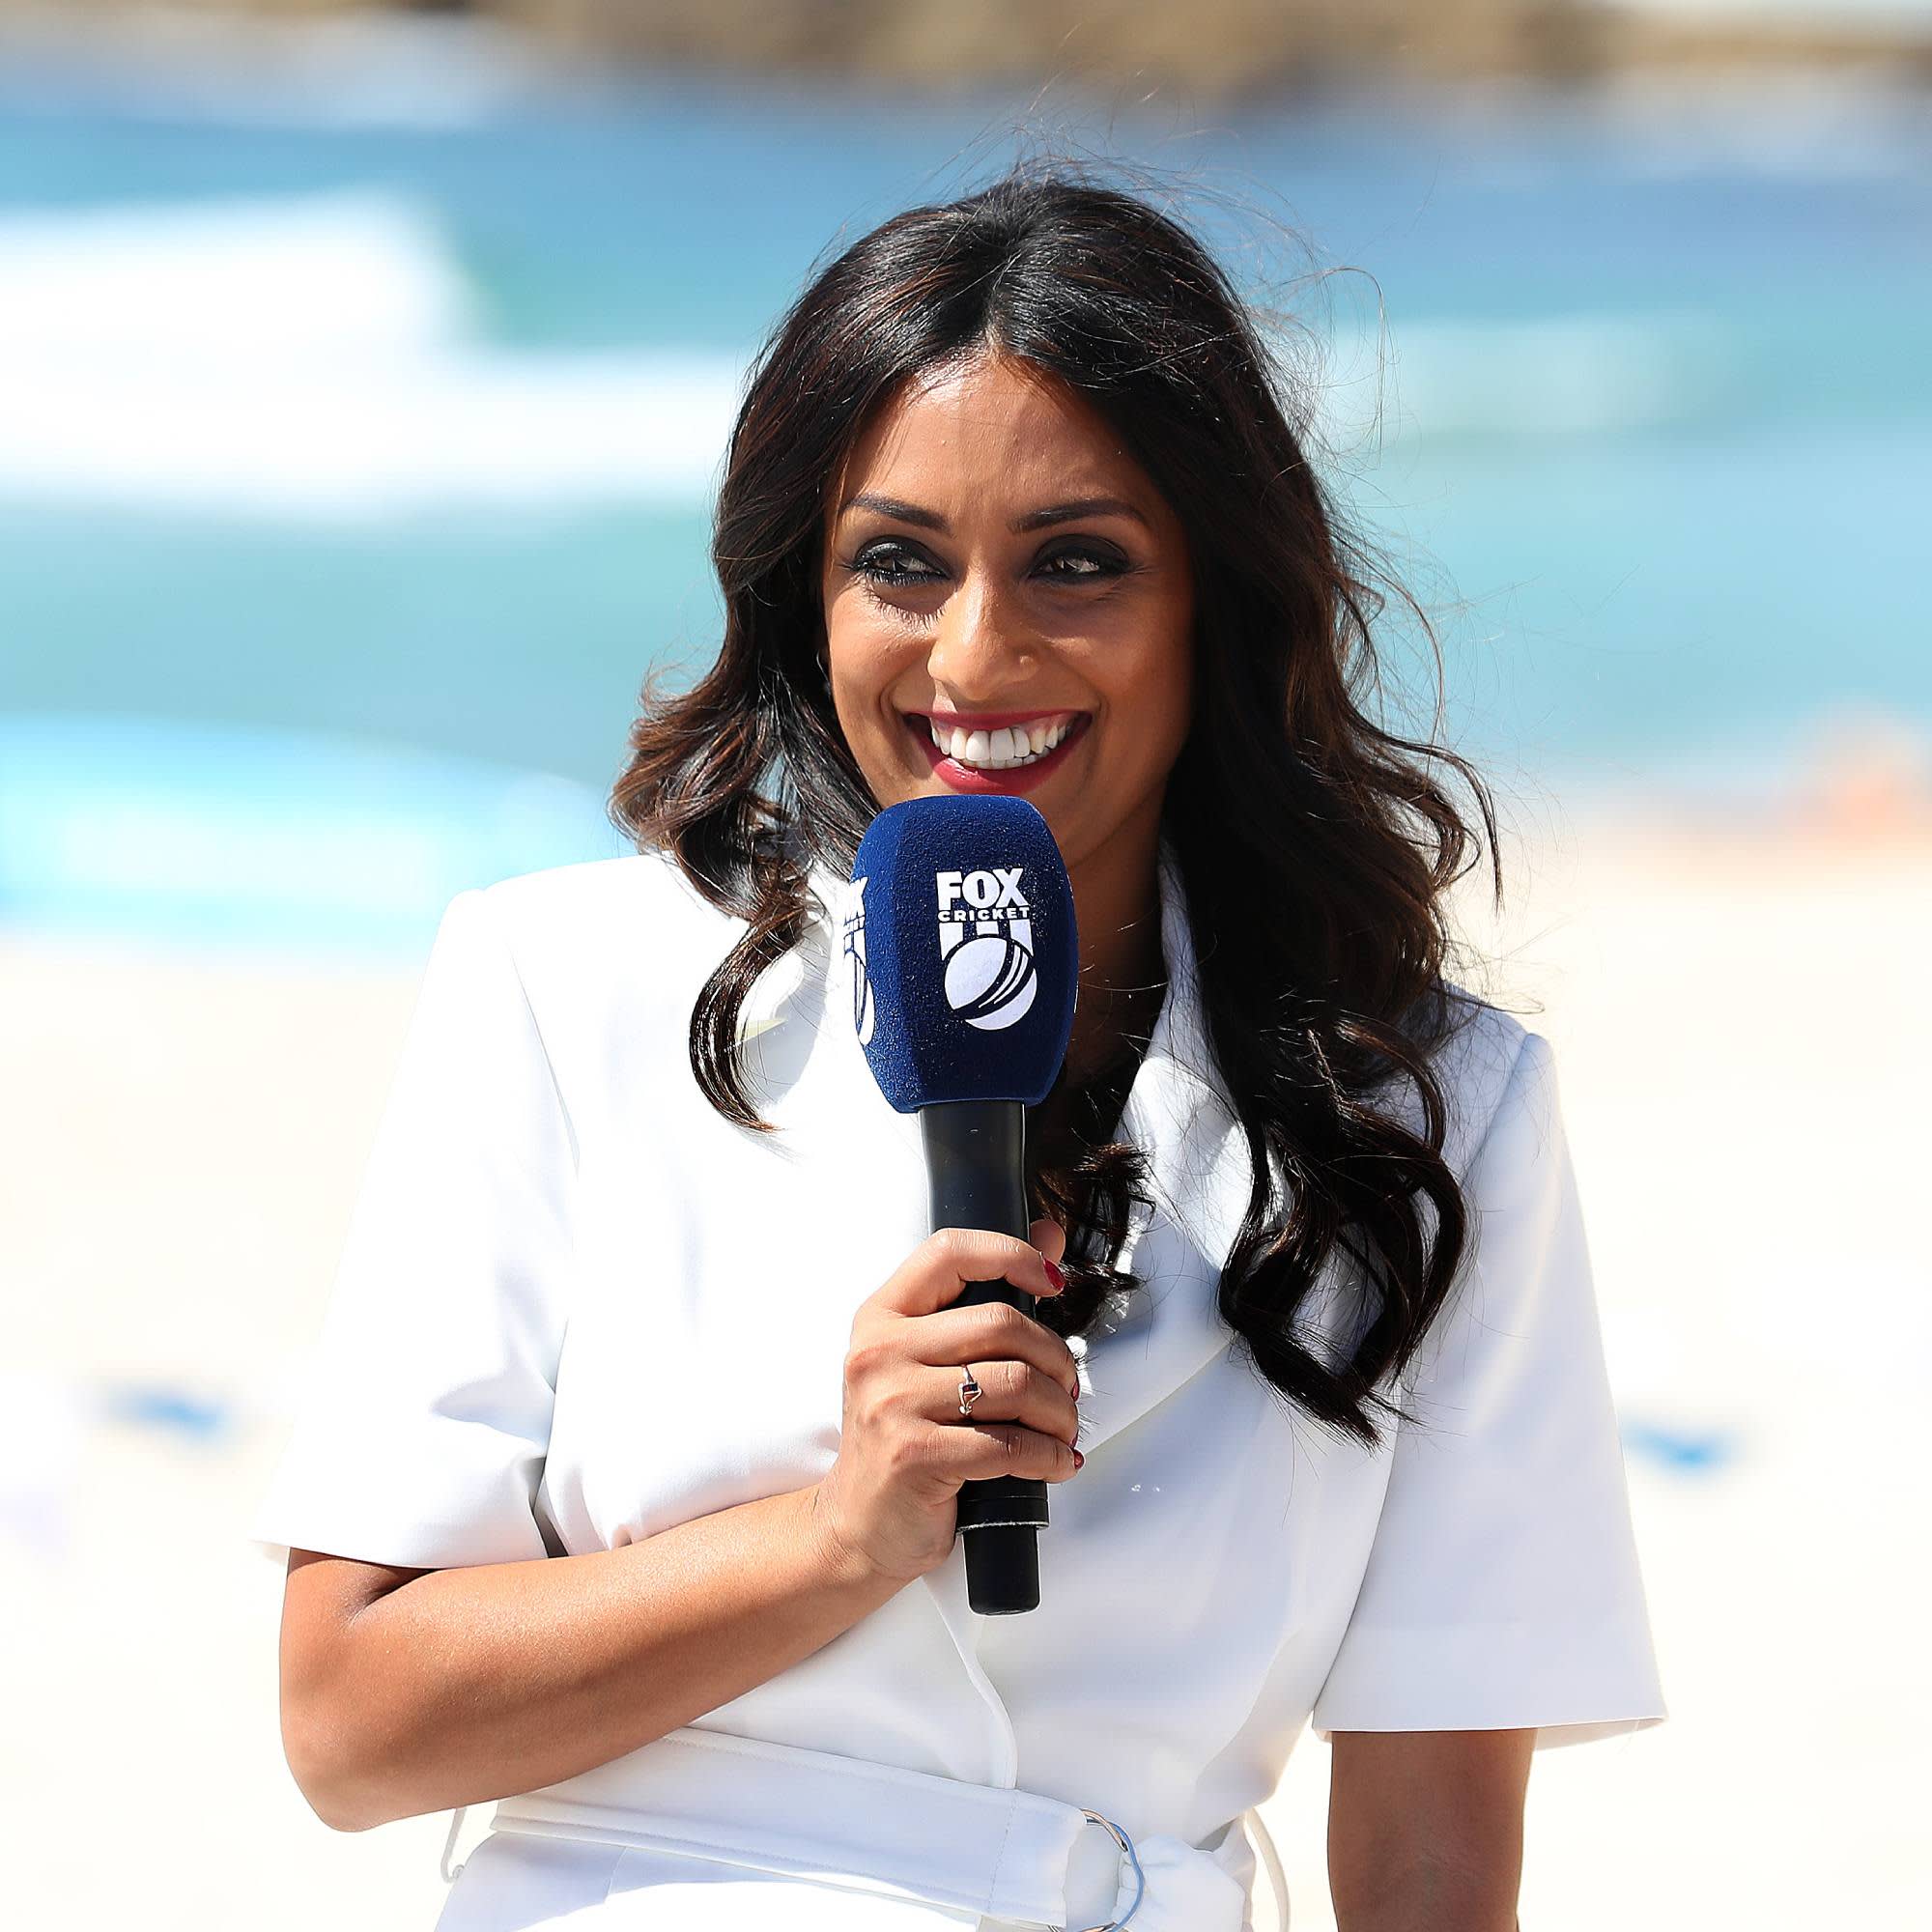 Cricket Commentator Isa Guha Is a Force to be Reckoned With During The